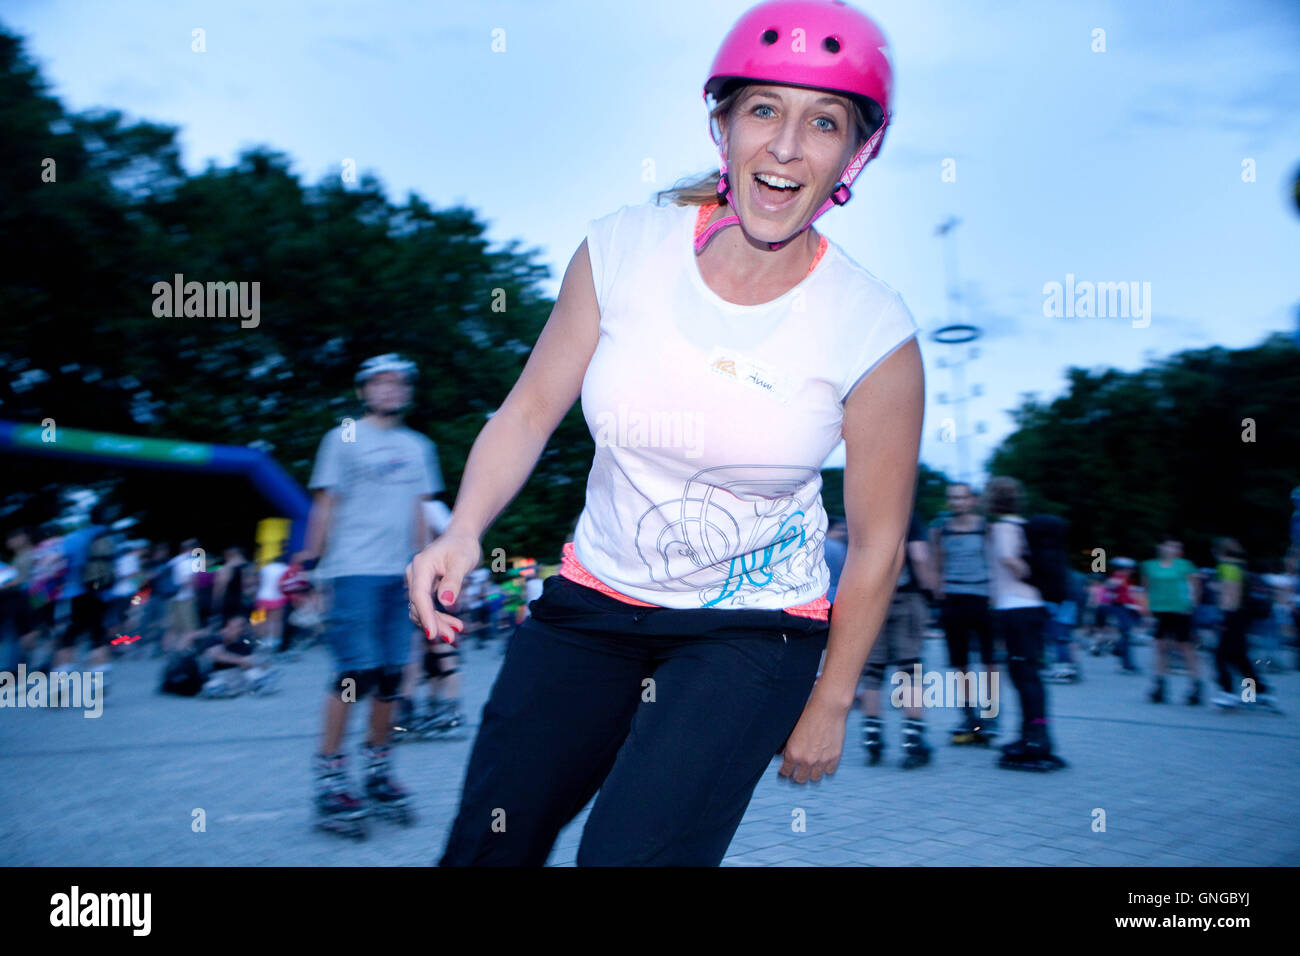 Anni Friesinger during the Blade Night in Munich, 2014 Stock Photo